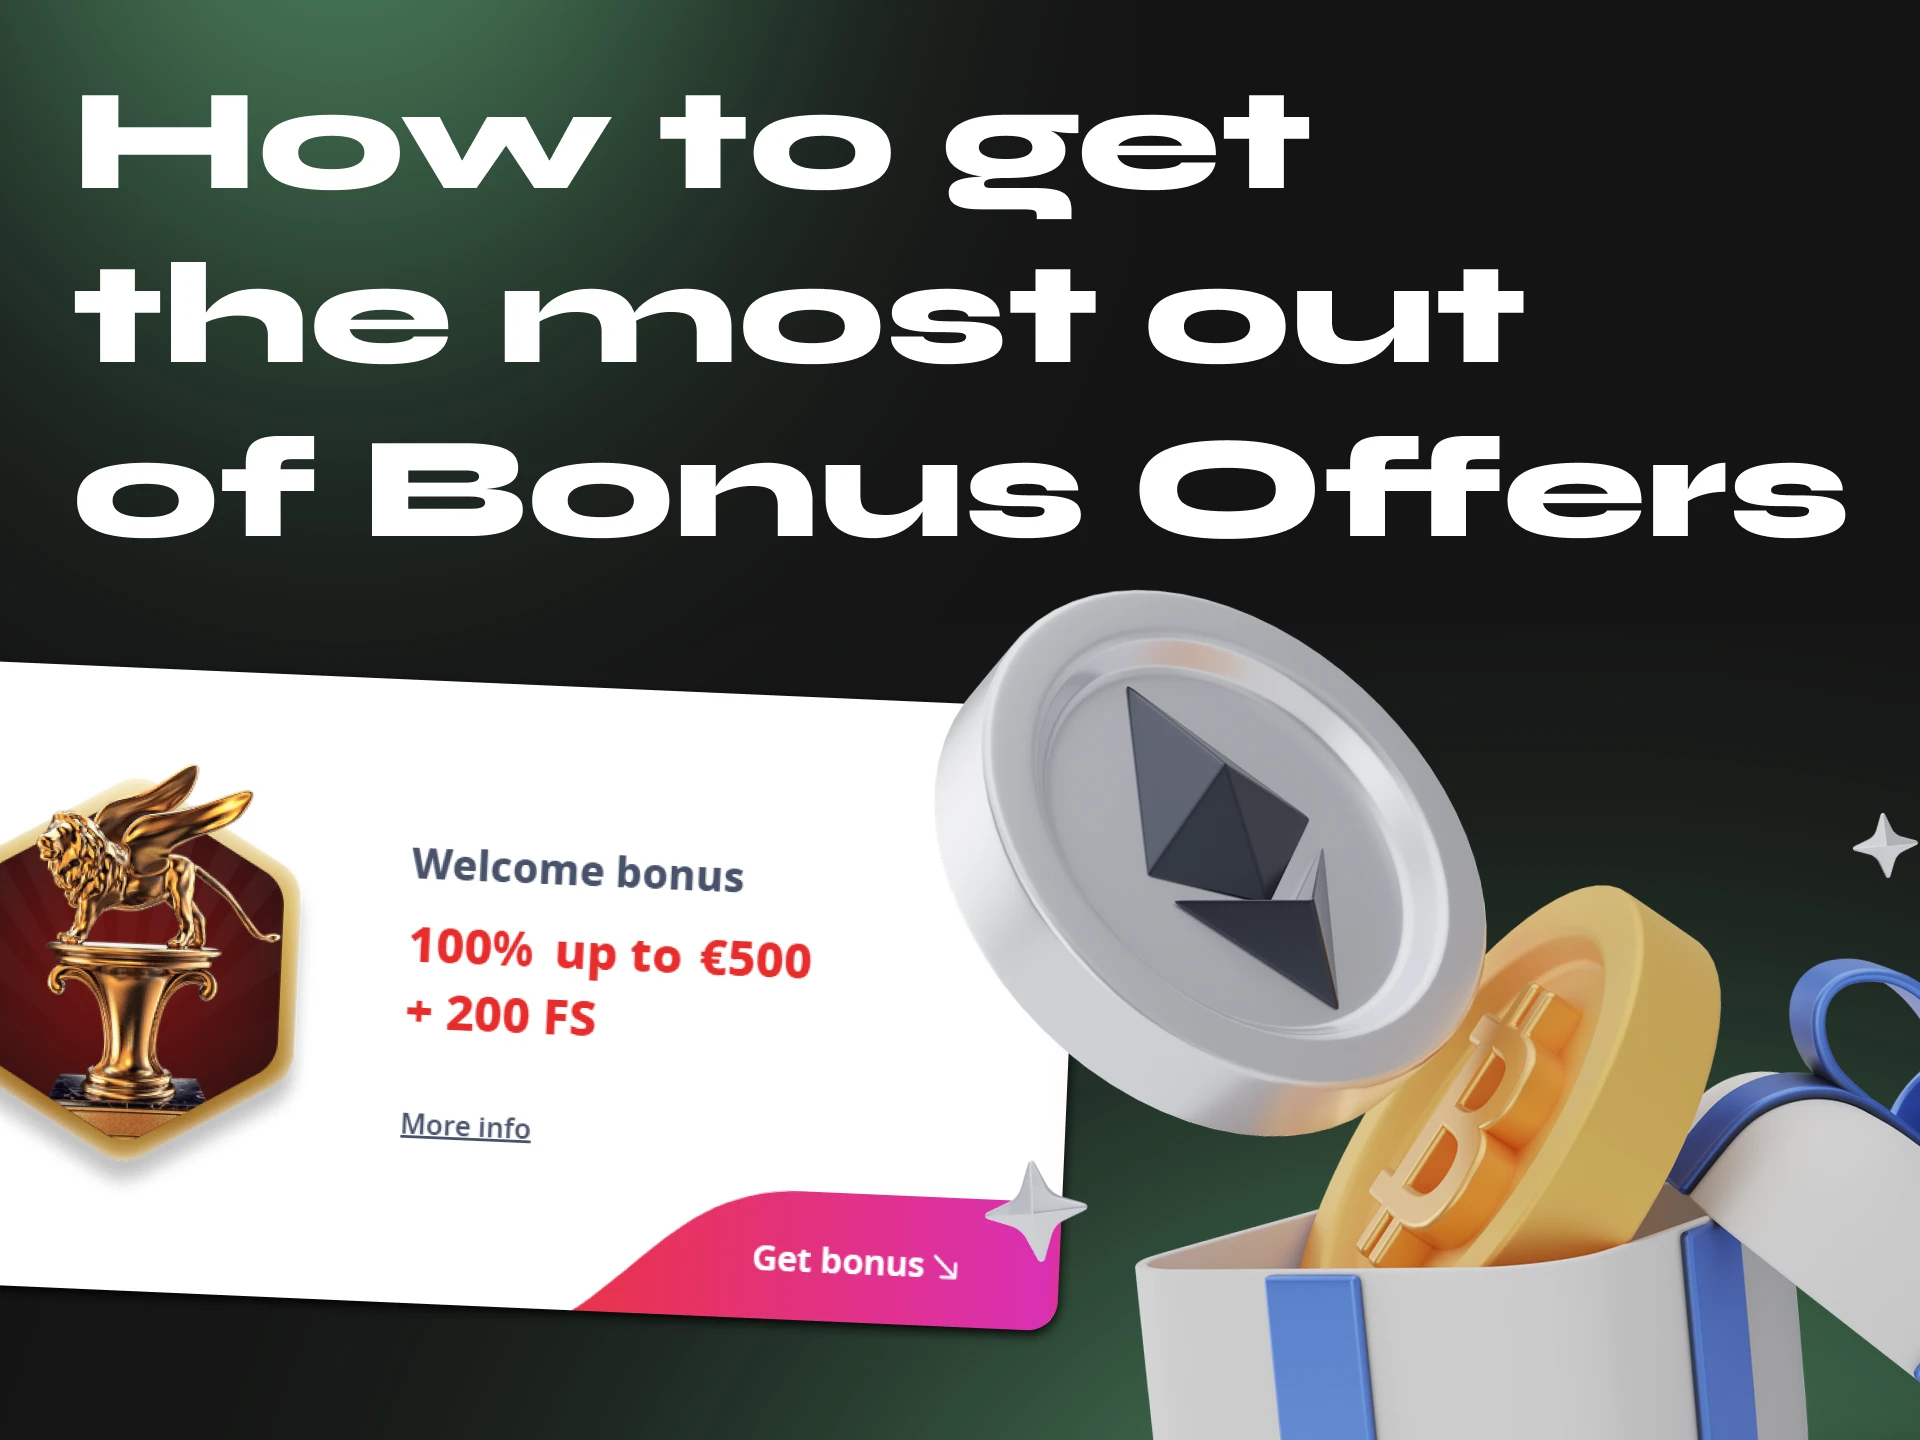 Read these tips to learn how to get the most out of bonus offers.